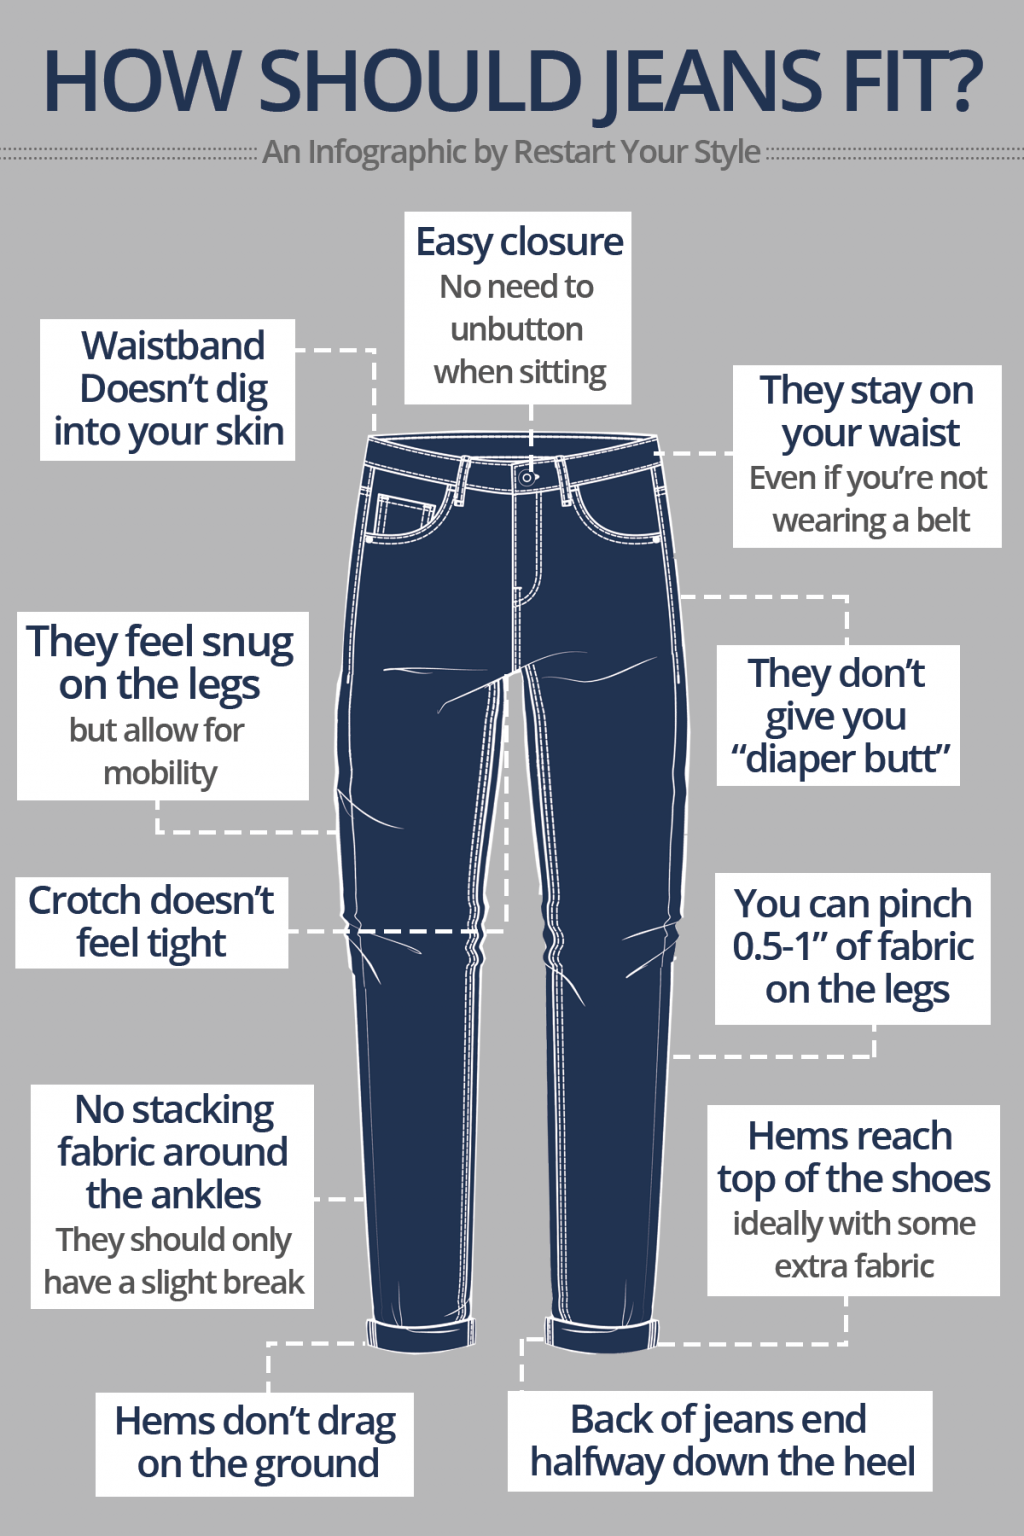 How Should Jeans Fit? Use This 12-Step Checklist for Perfect Fit